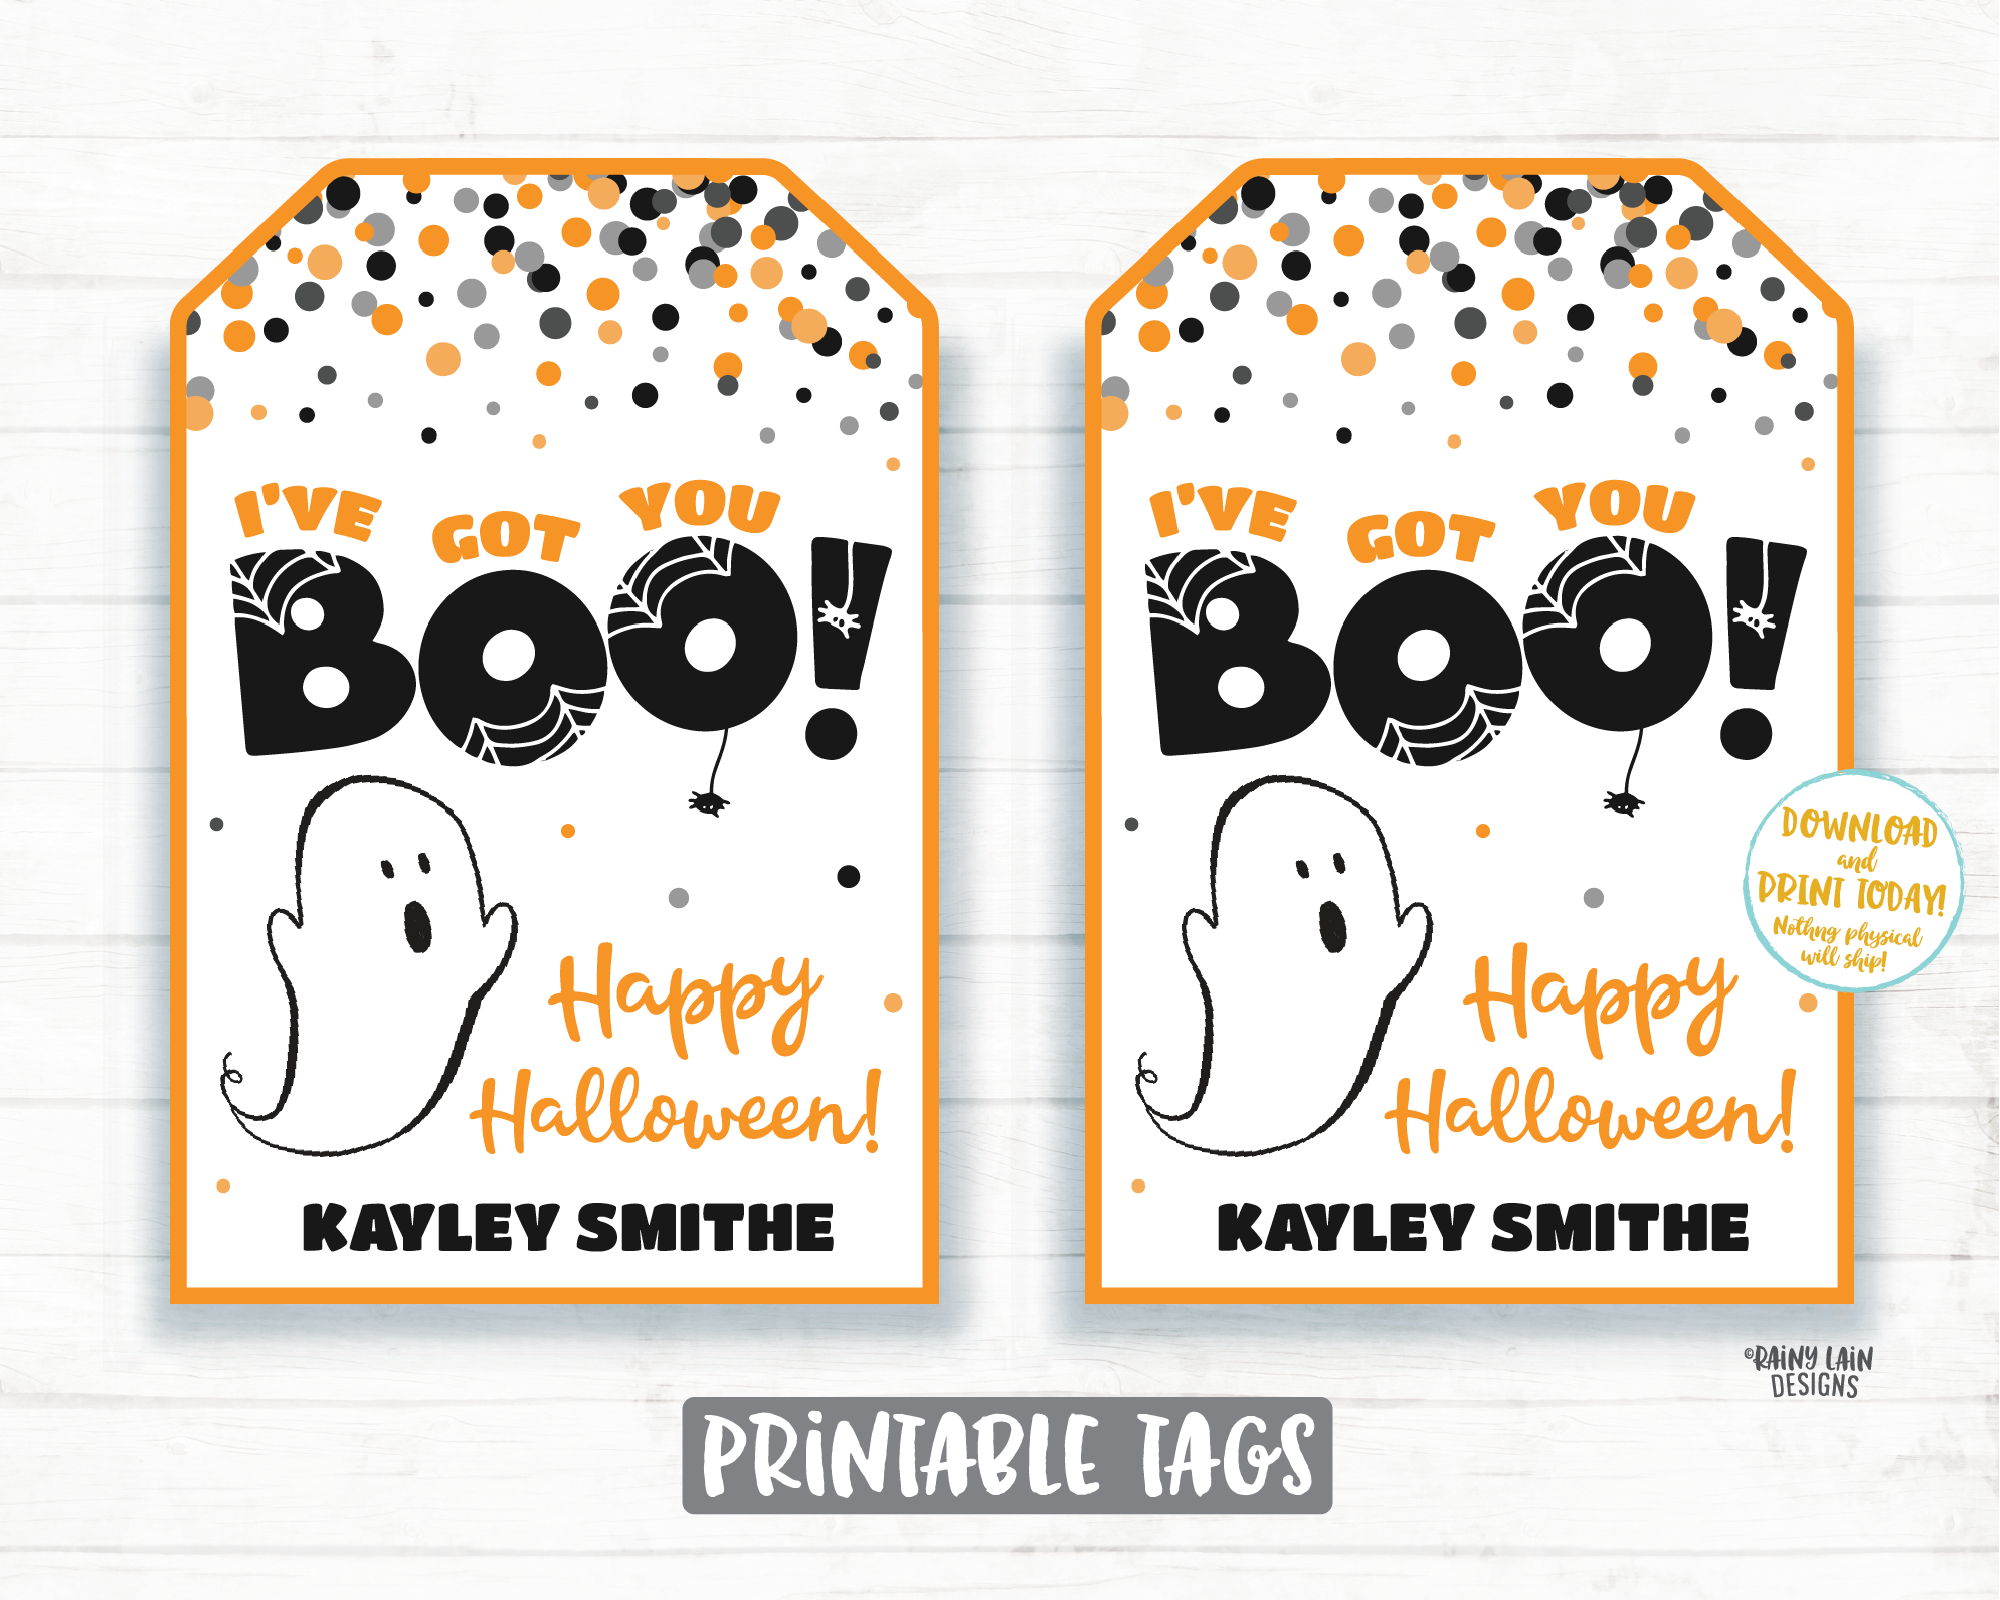 I've Got You BOO tag Happy Halloween Thank you Tags Gifts Tags Appreciation Favor Tags Teacher Staff School Co-Worker Friend Gift Boo Tags